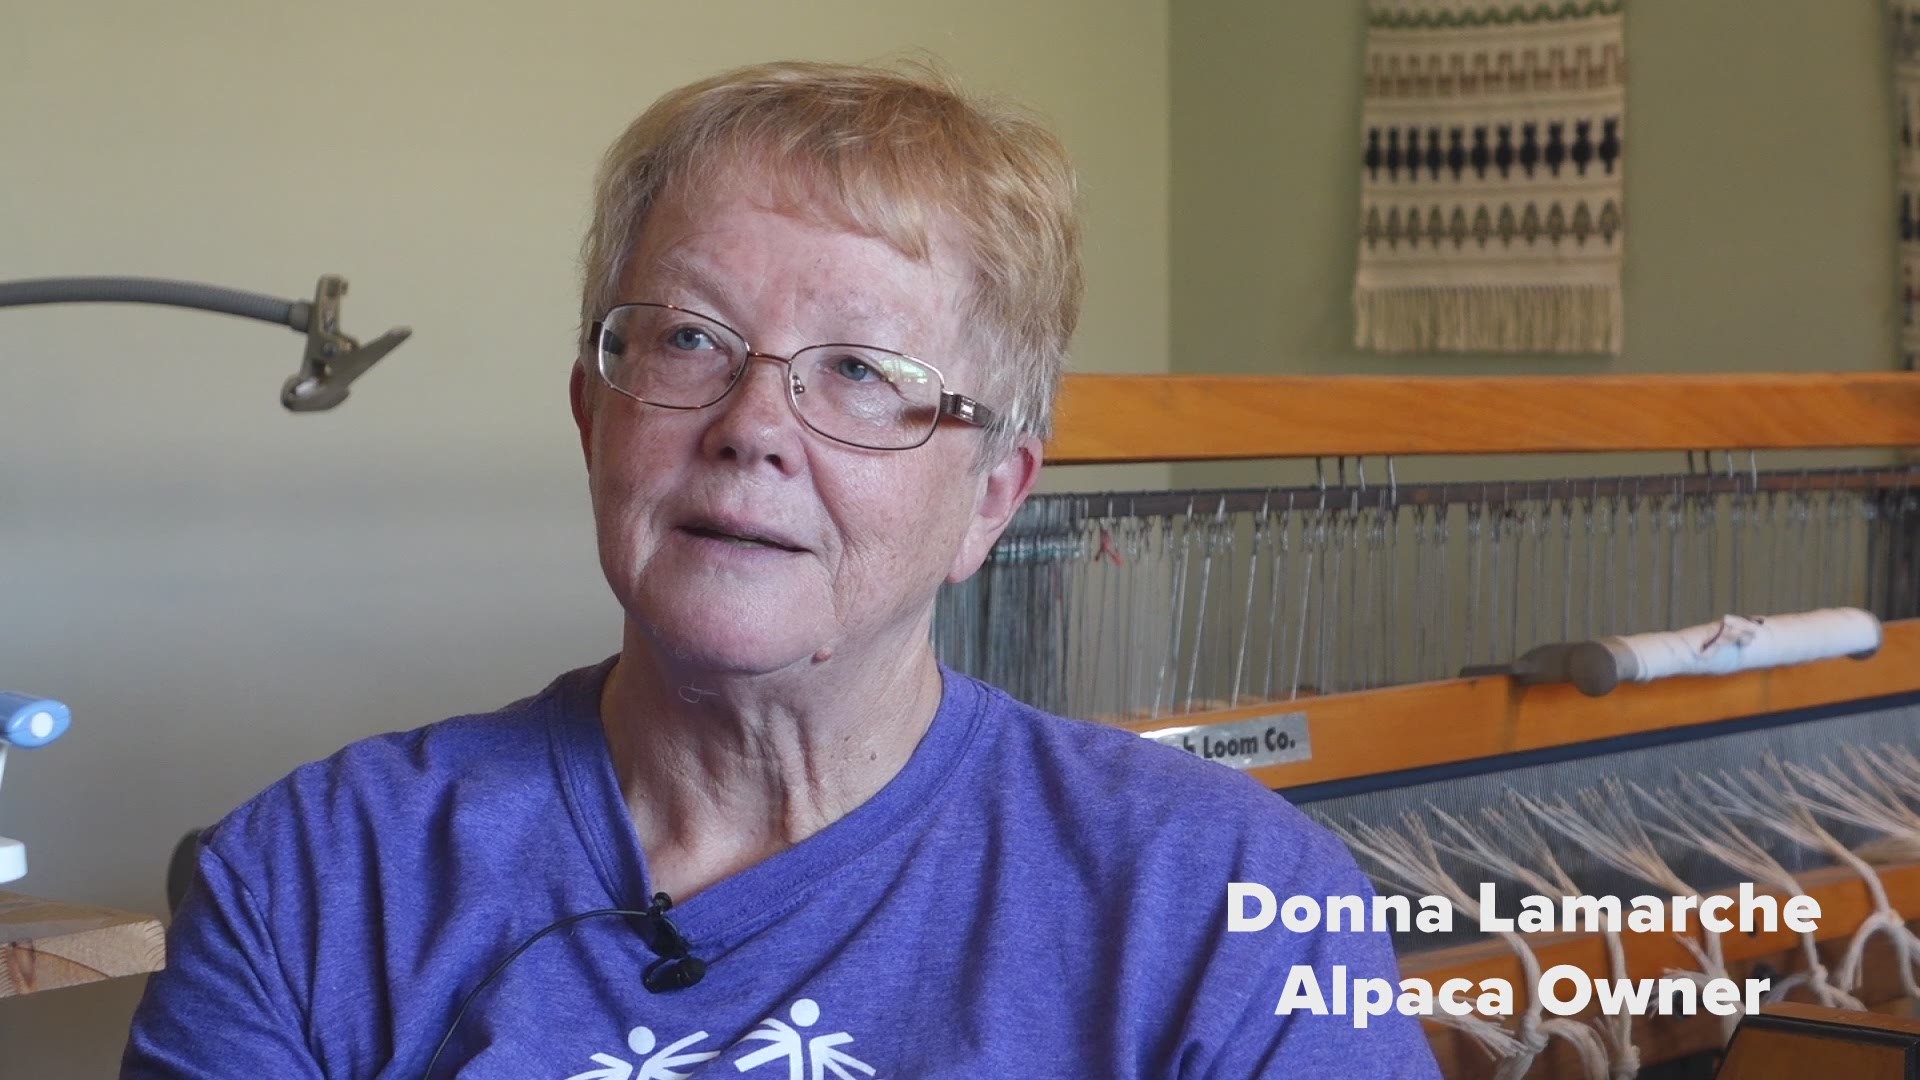 Donna and Alex Lamarche never thought they'd own a farm, much less own a herd of alpacas but after their son suffered traumatic brain damage from a car accident at 16, Donna and Alex made some big changes.